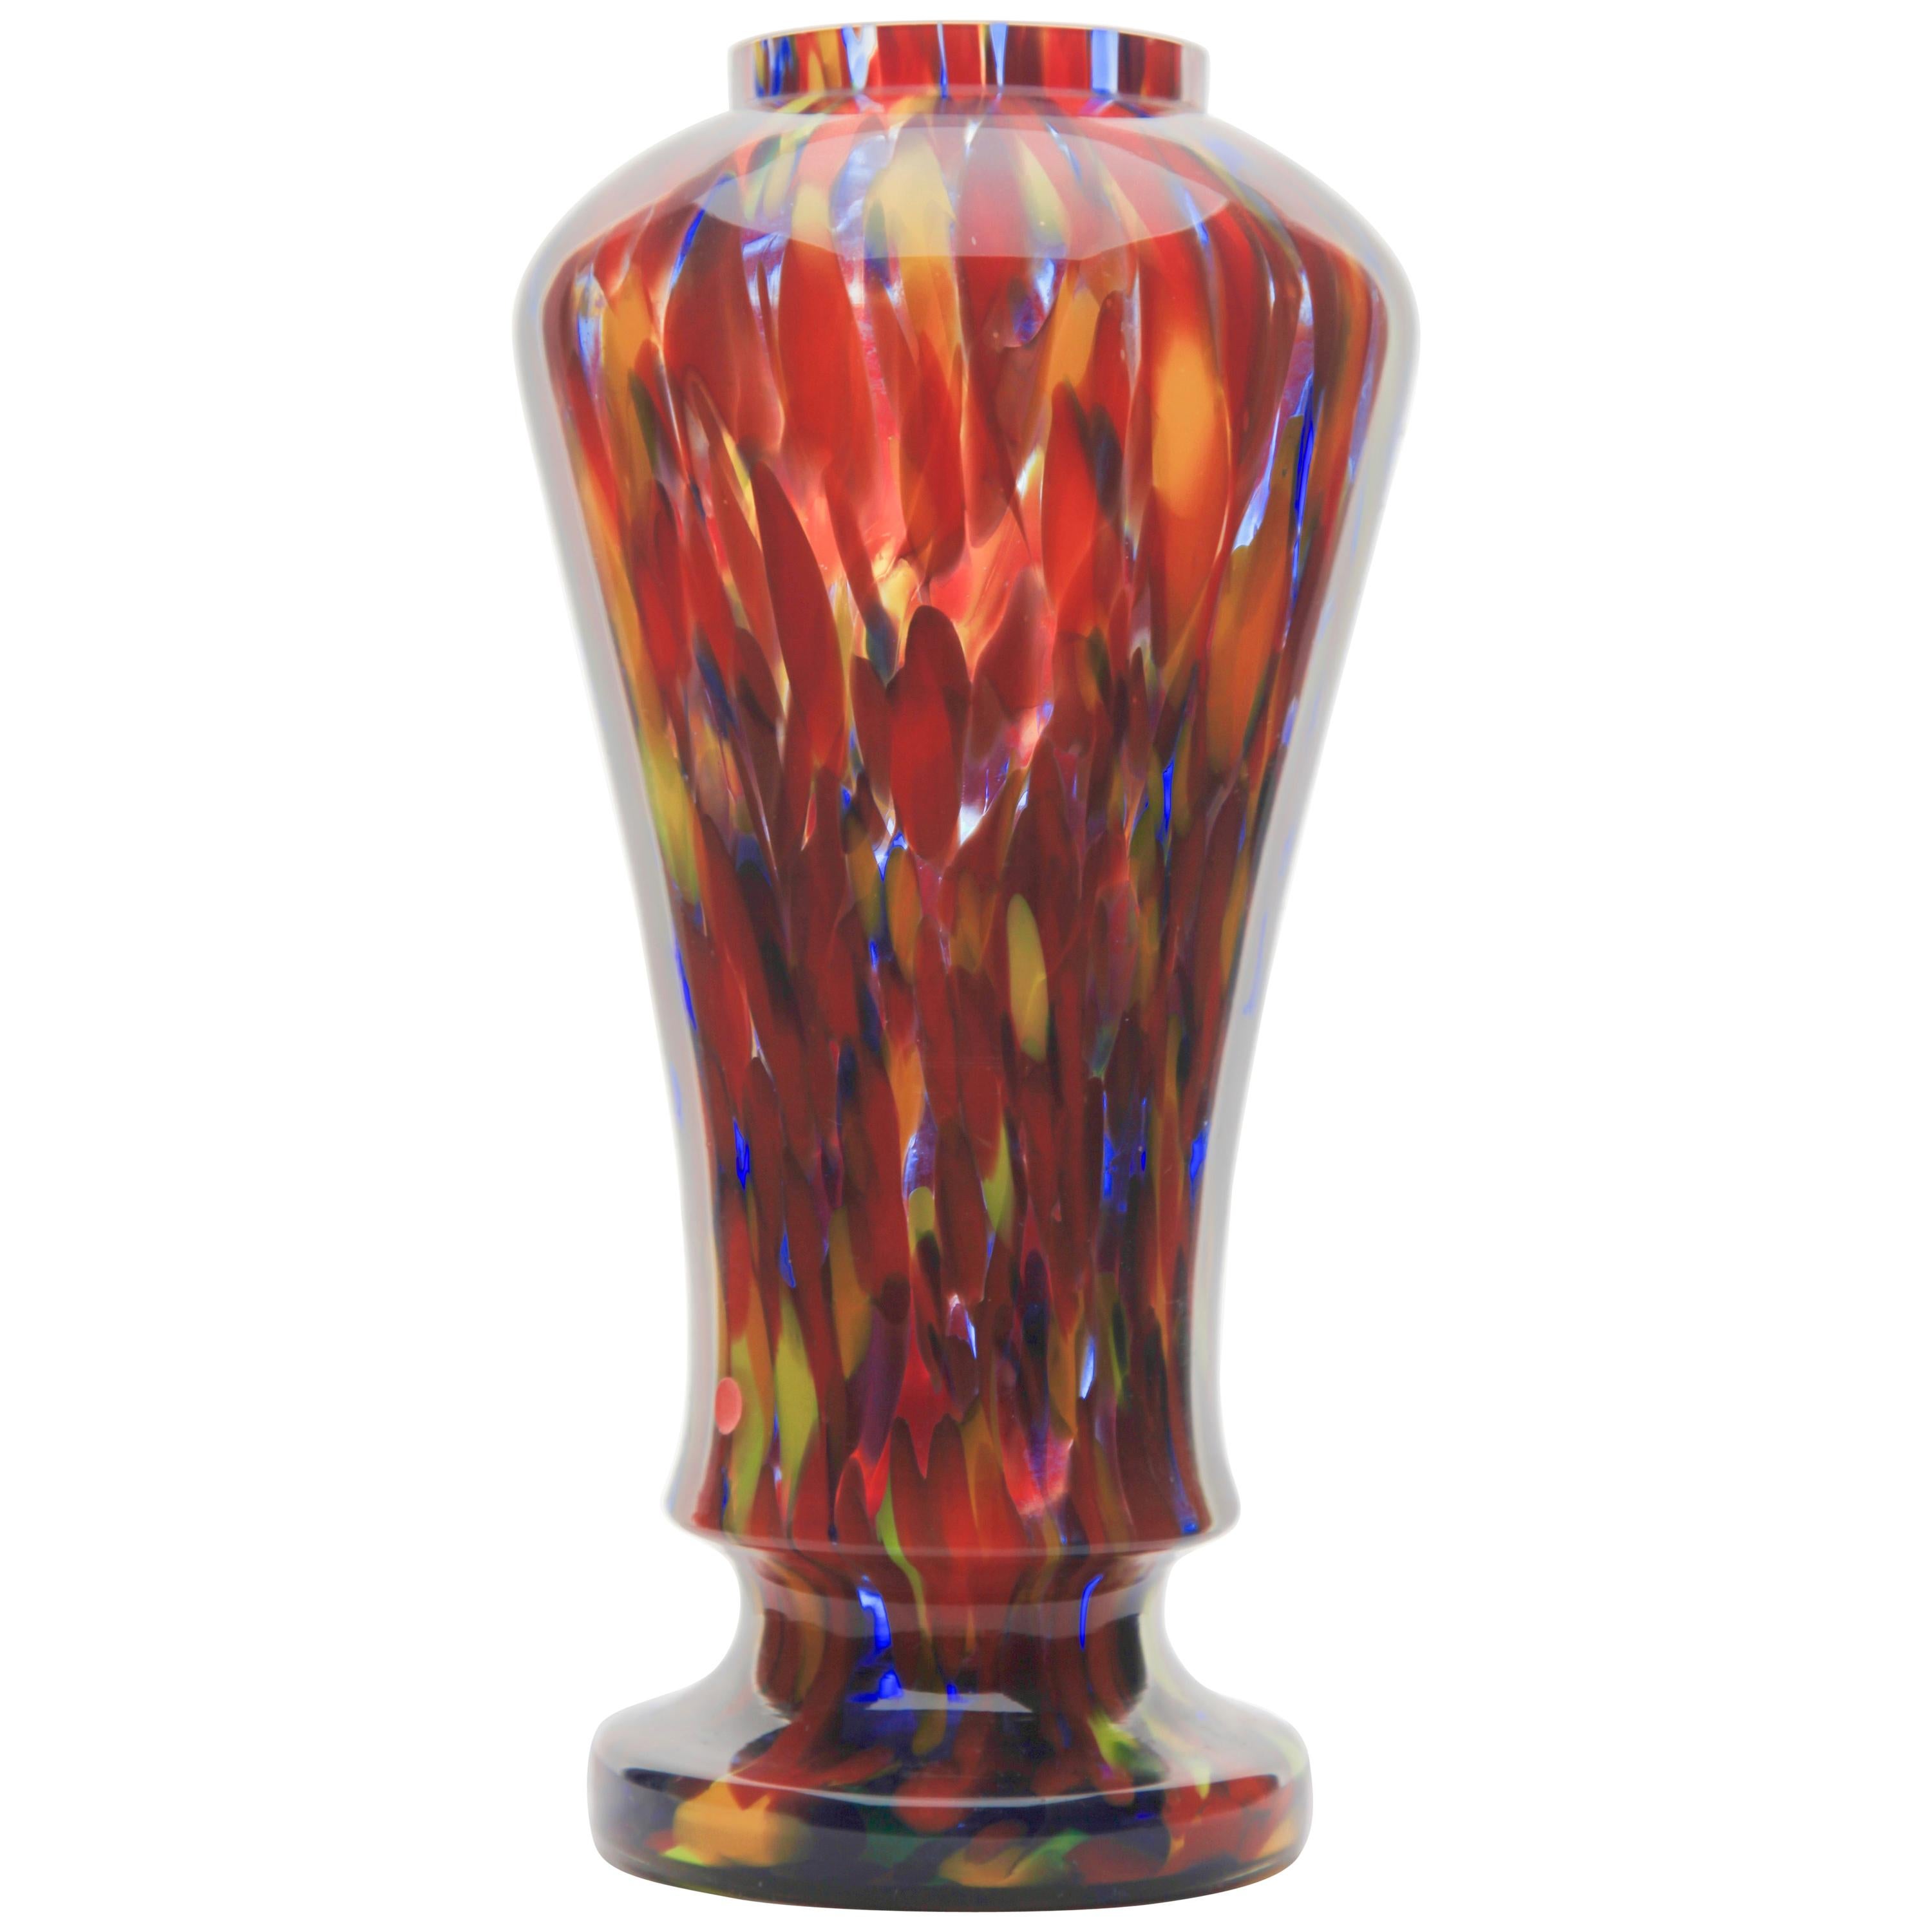 Kralik Baluster Vase with Fire Decor, Multicolored Spatterglass 'End-of-Day'